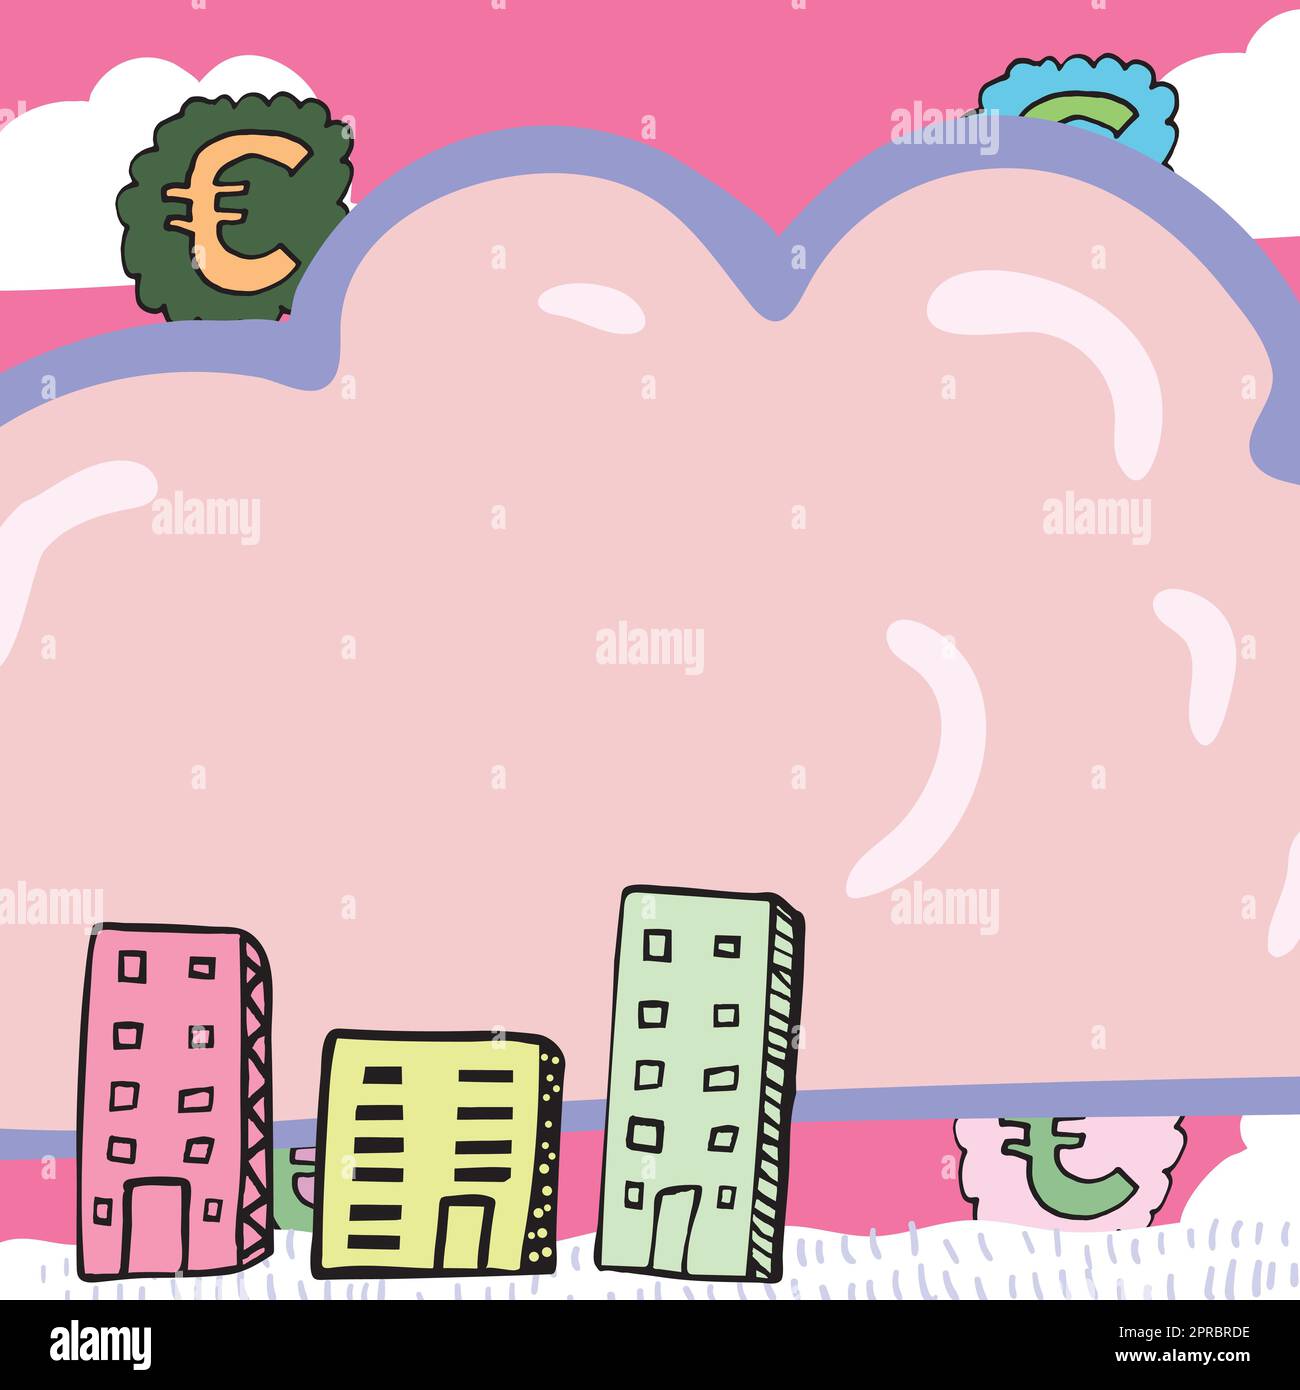 Important Message Written In Shape Of Cloud With Euro Signs In Background And Buildings. Crutial Informations In Cloudy Form With Symbols And Houses Around. Stock Vector